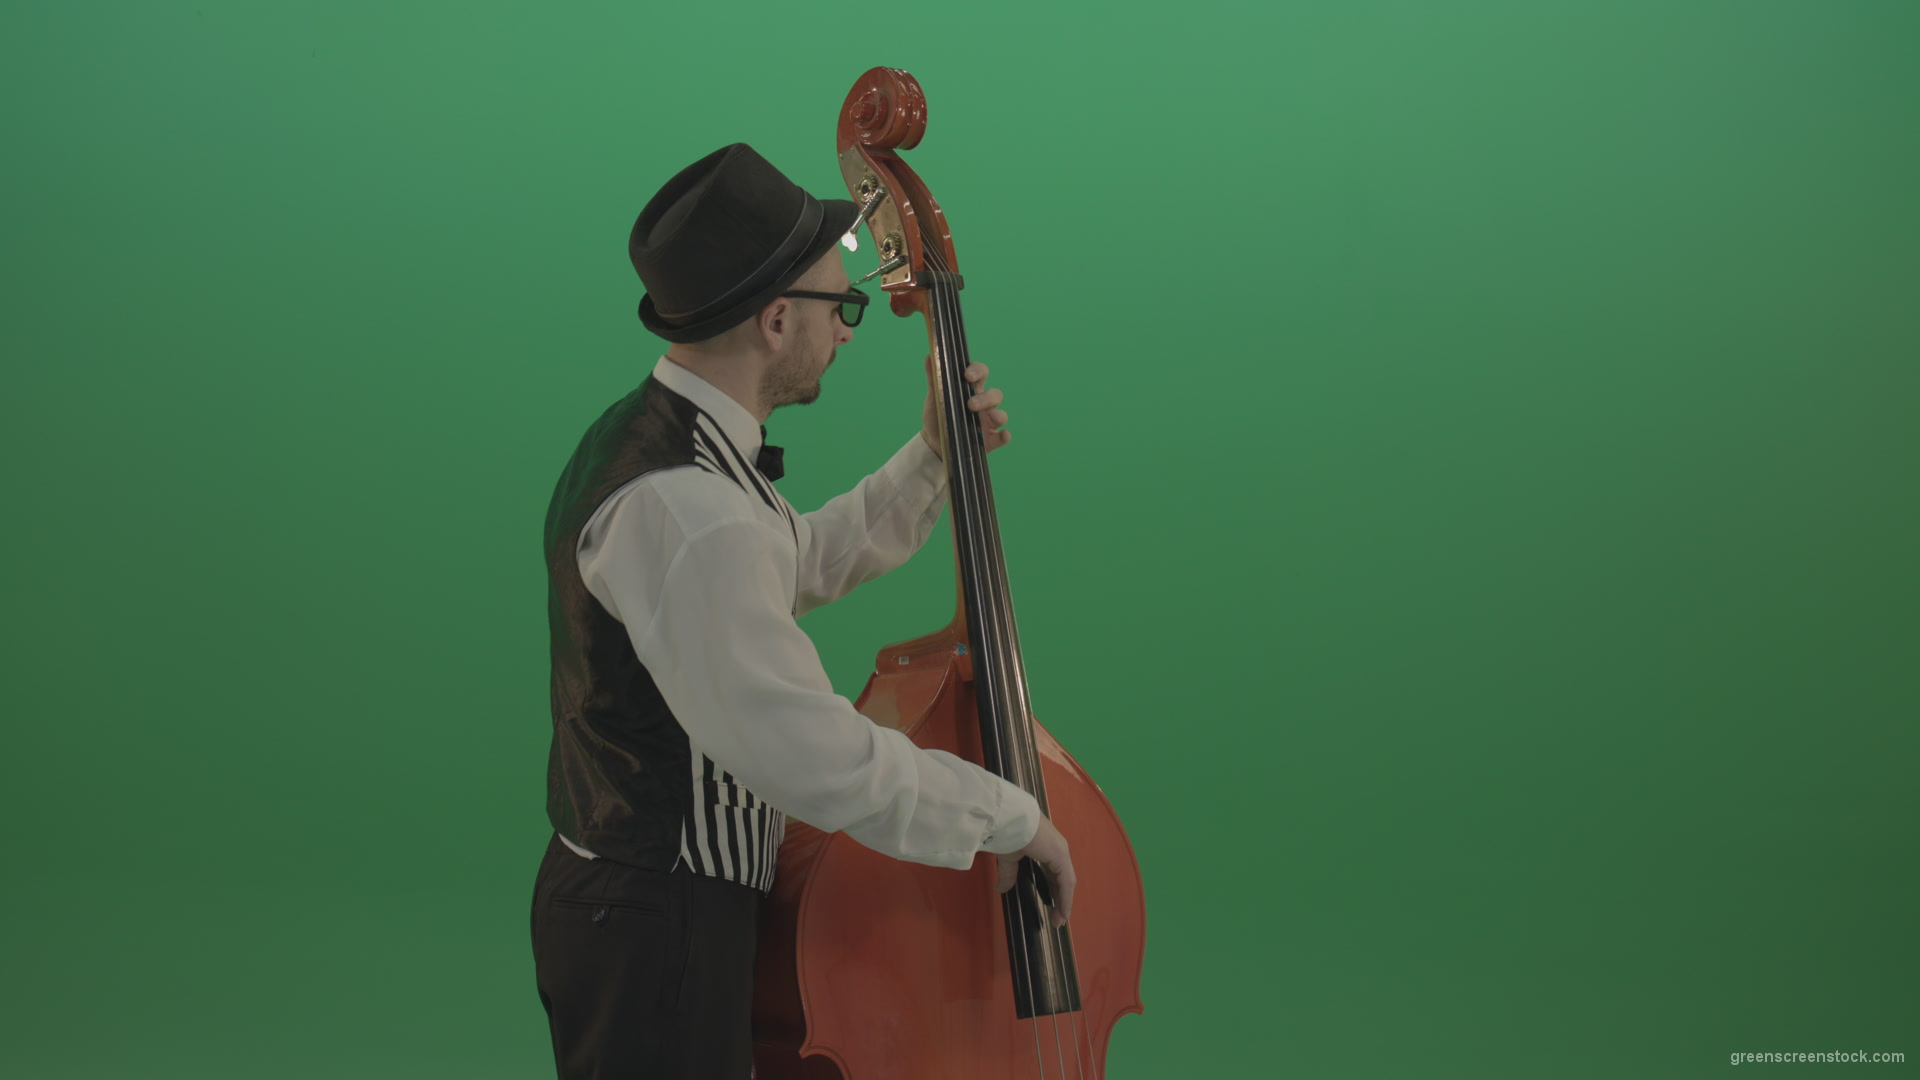 Young-Man-play-jazz-on-double-bass-String-music-instrument-isolated-on-green-screen-in-back-side-view_002 Green Screen Stock